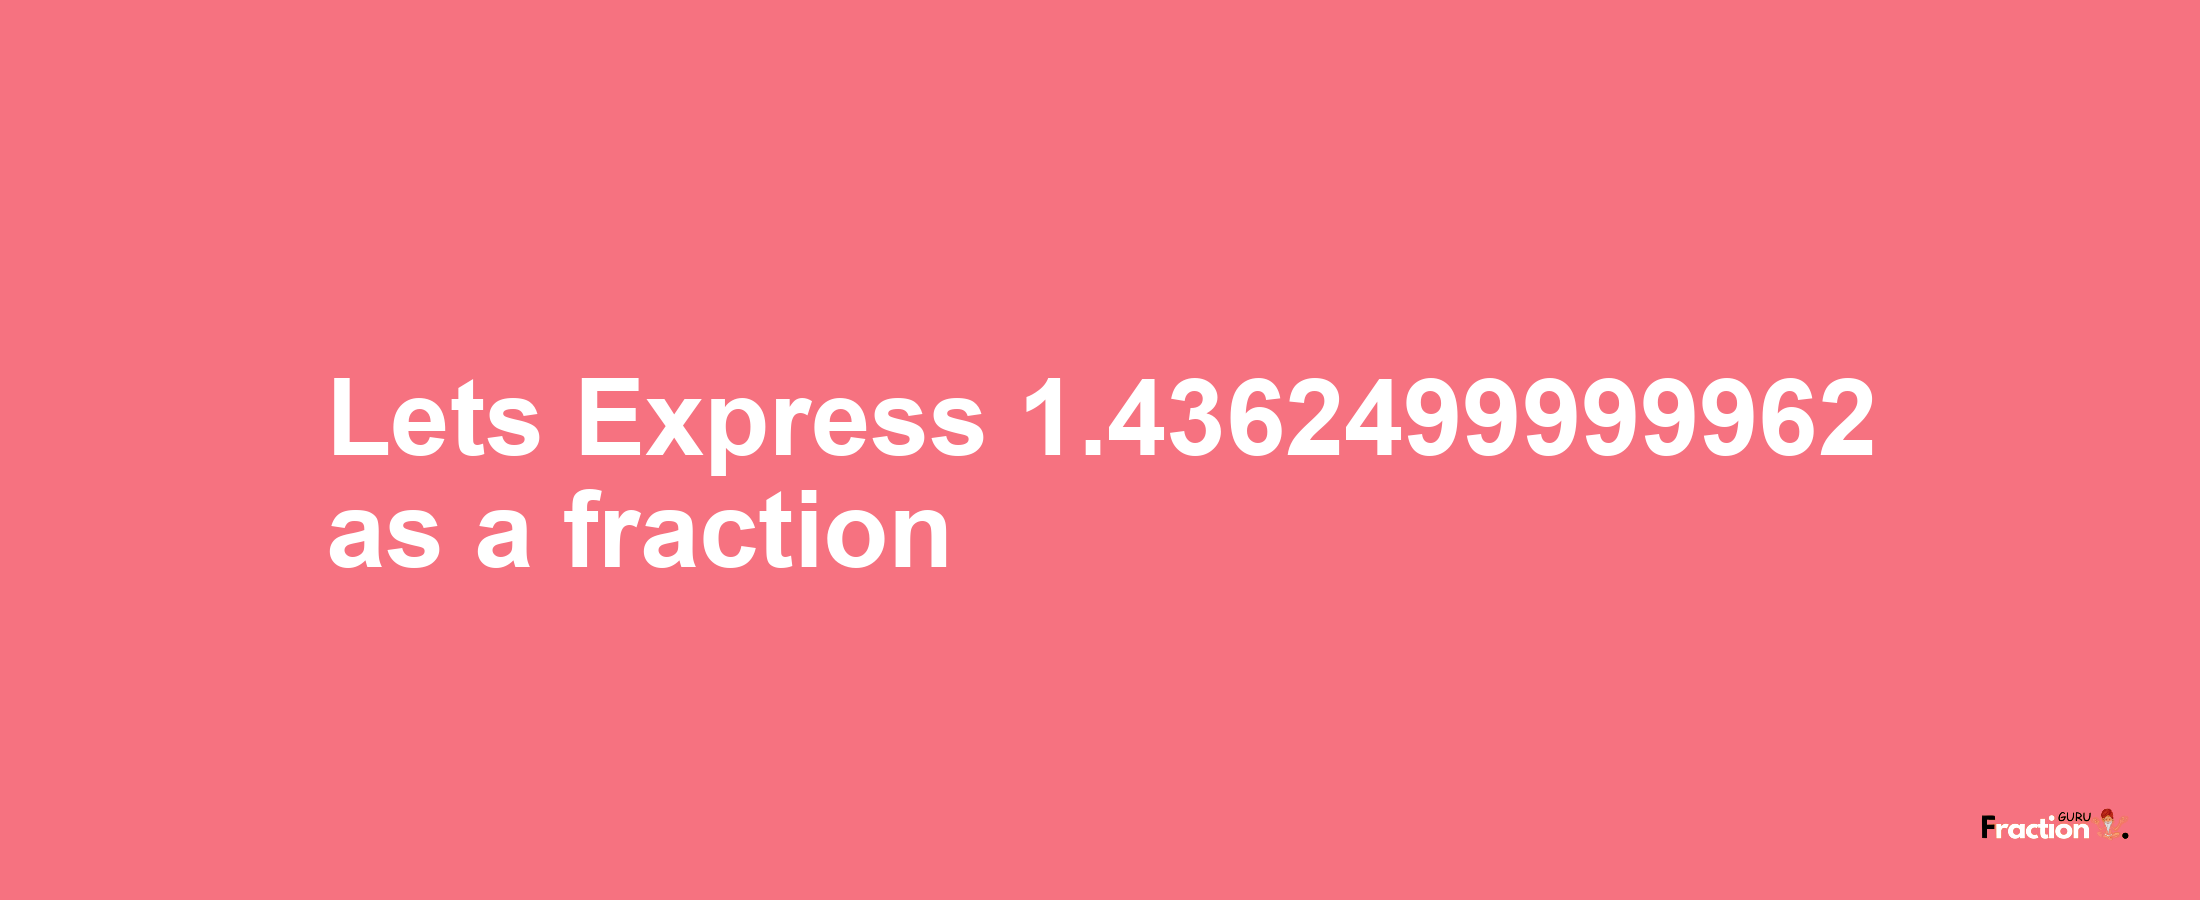 Lets Express 1.4362499999962 as afraction